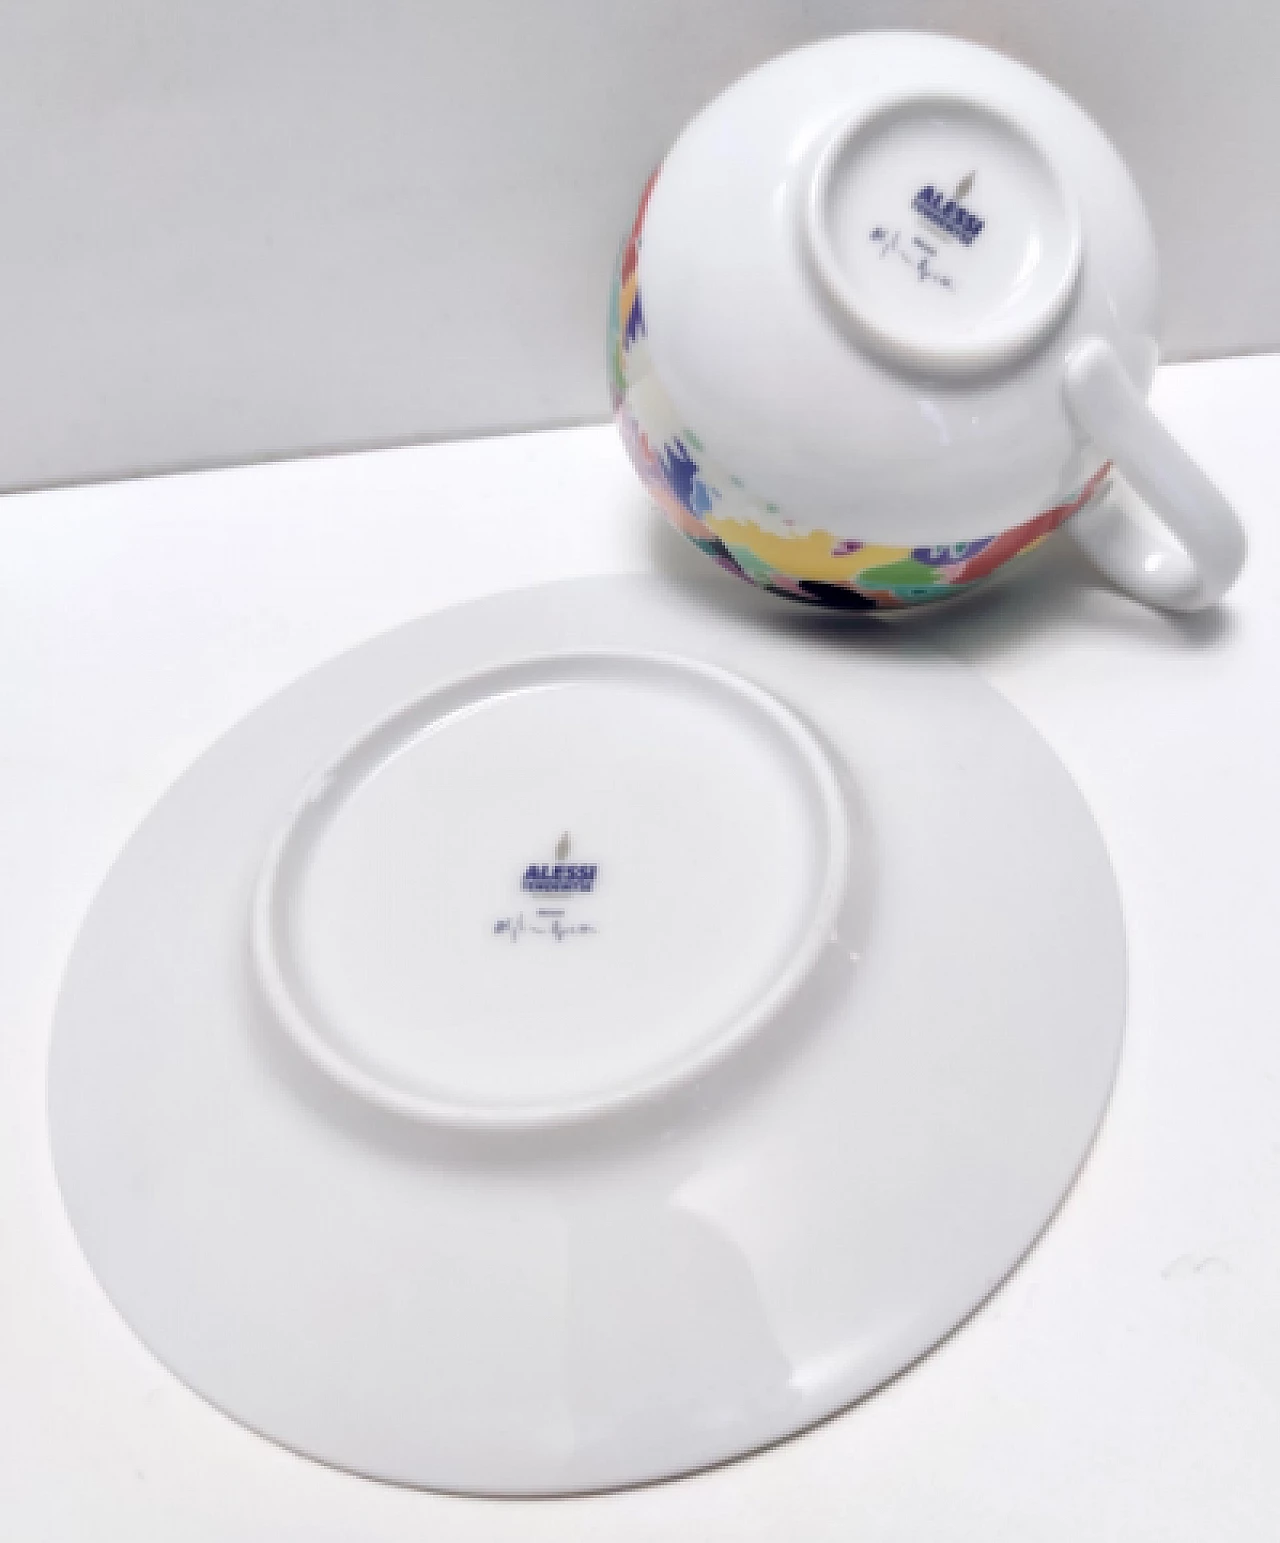 La Bella Tavola tea and coffee service by Sottsass and Boetti for Alessi, 1990s 9